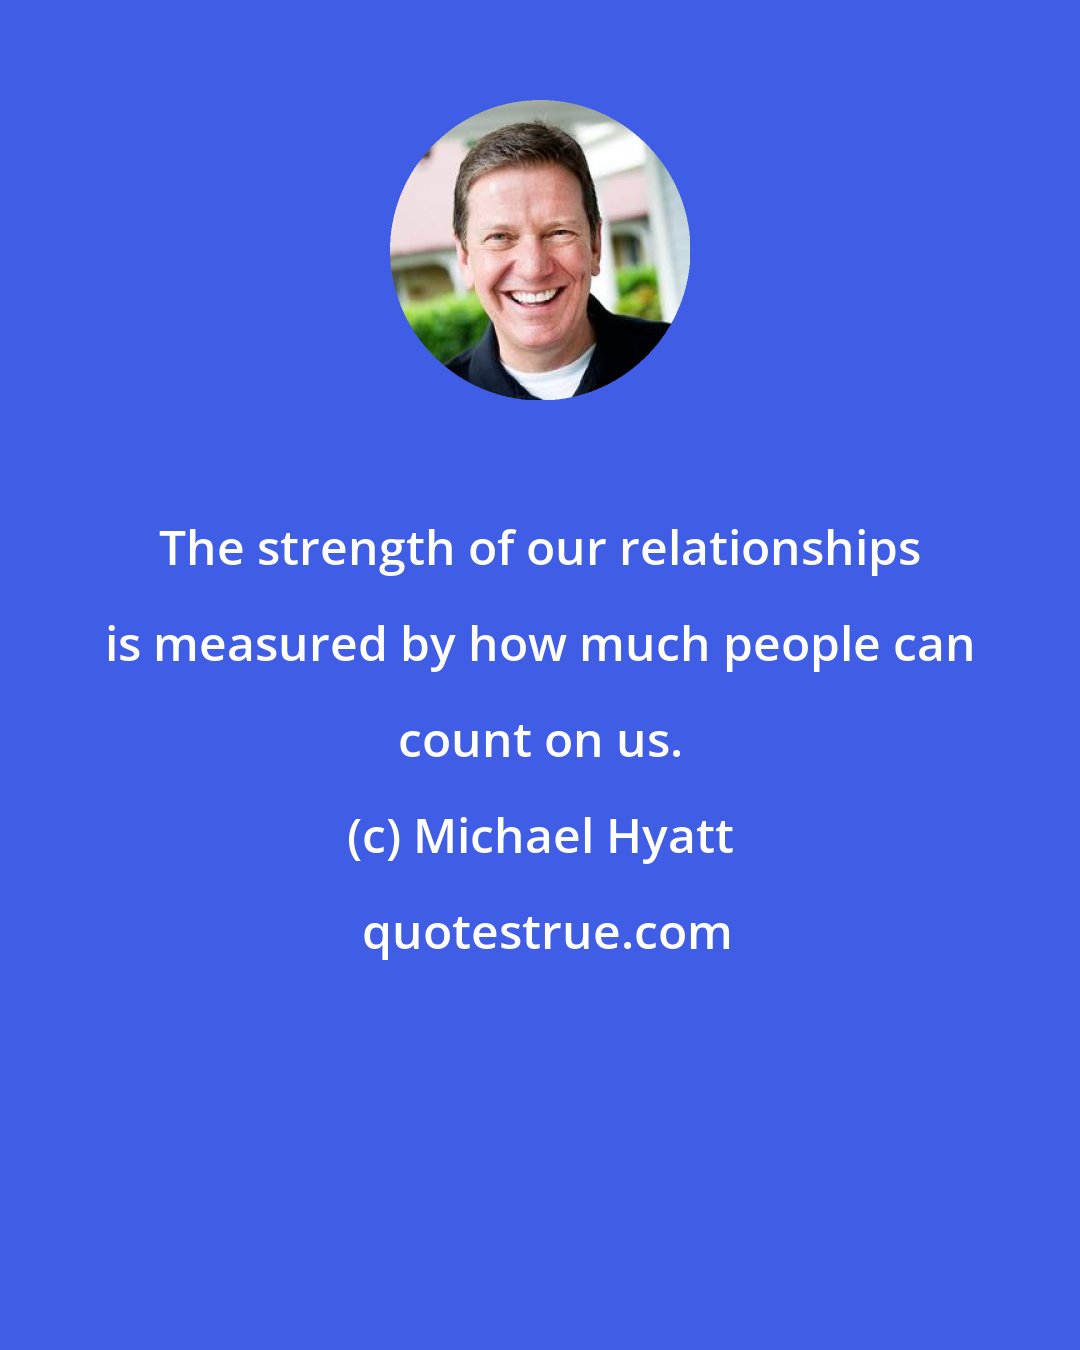 Michael Hyatt: The strength of our relationships is measured by how much people can count on us.